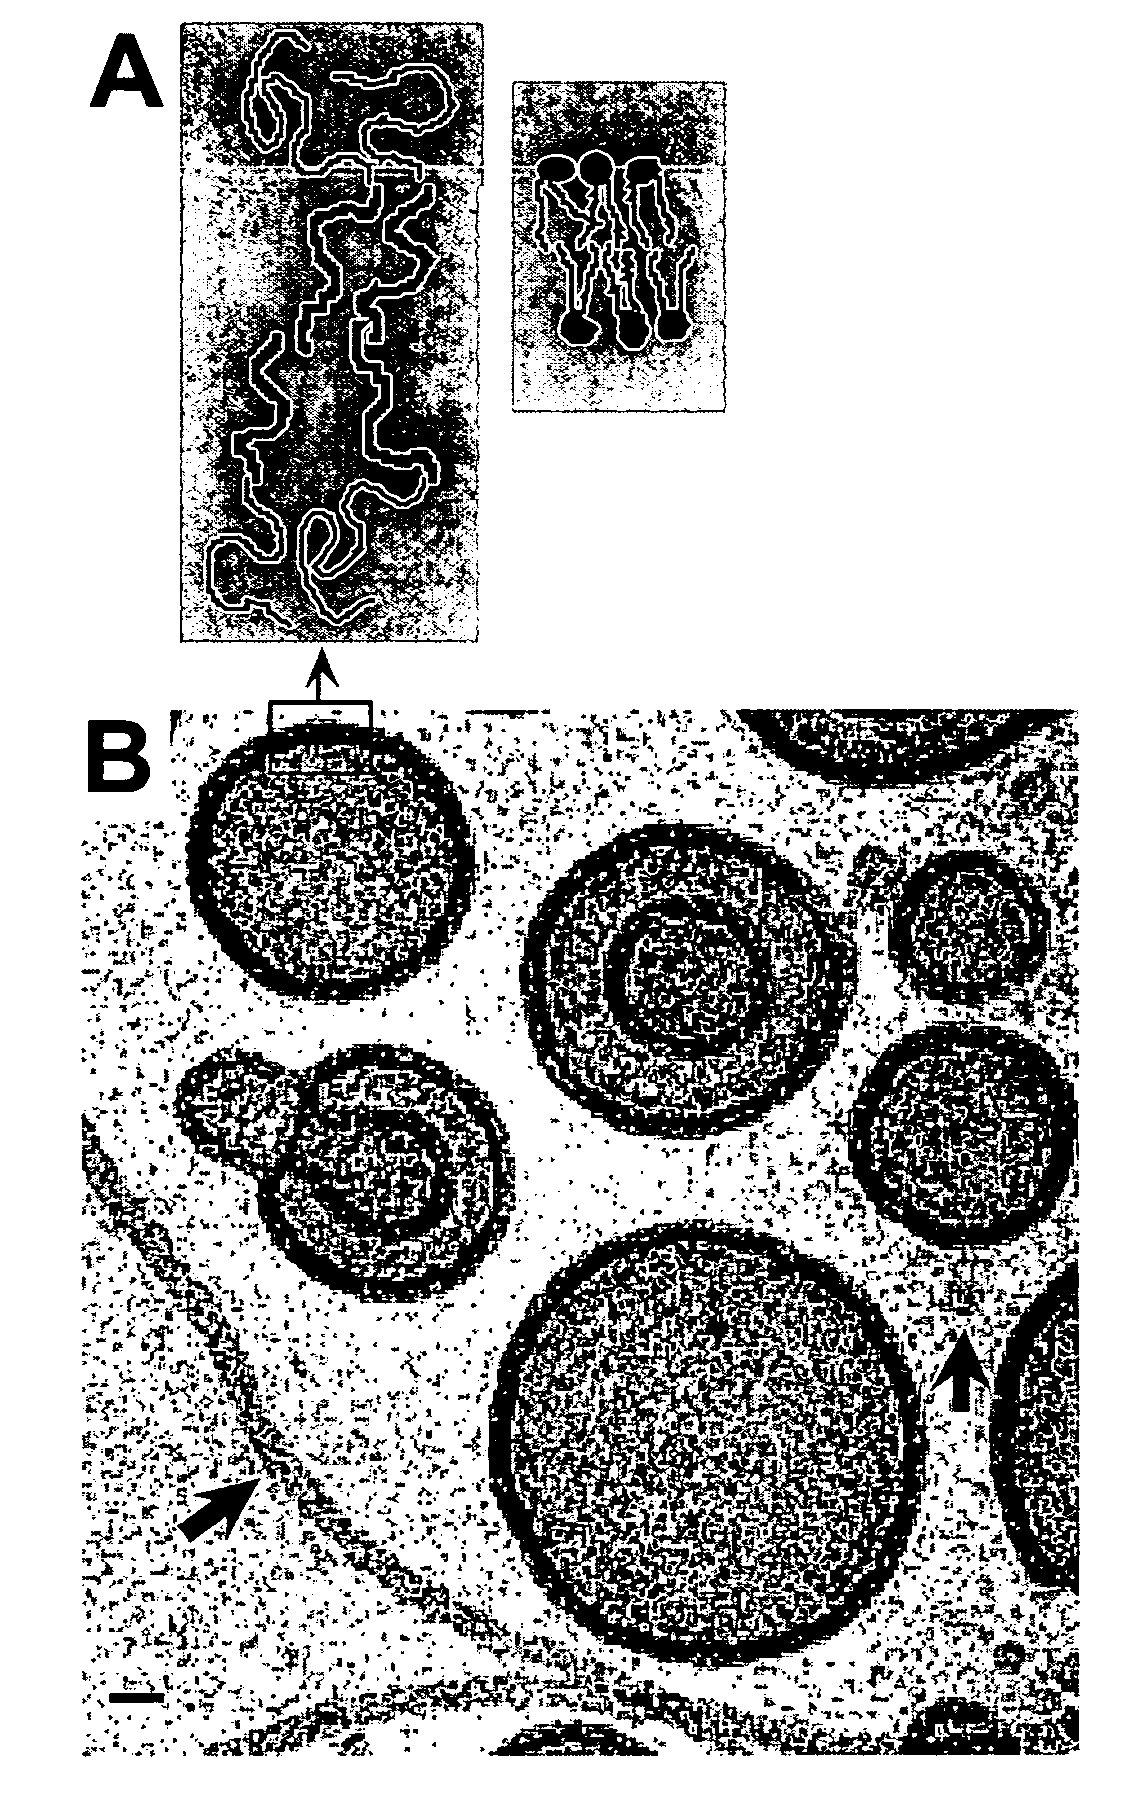 Polymersomes and related encapsulating membranes